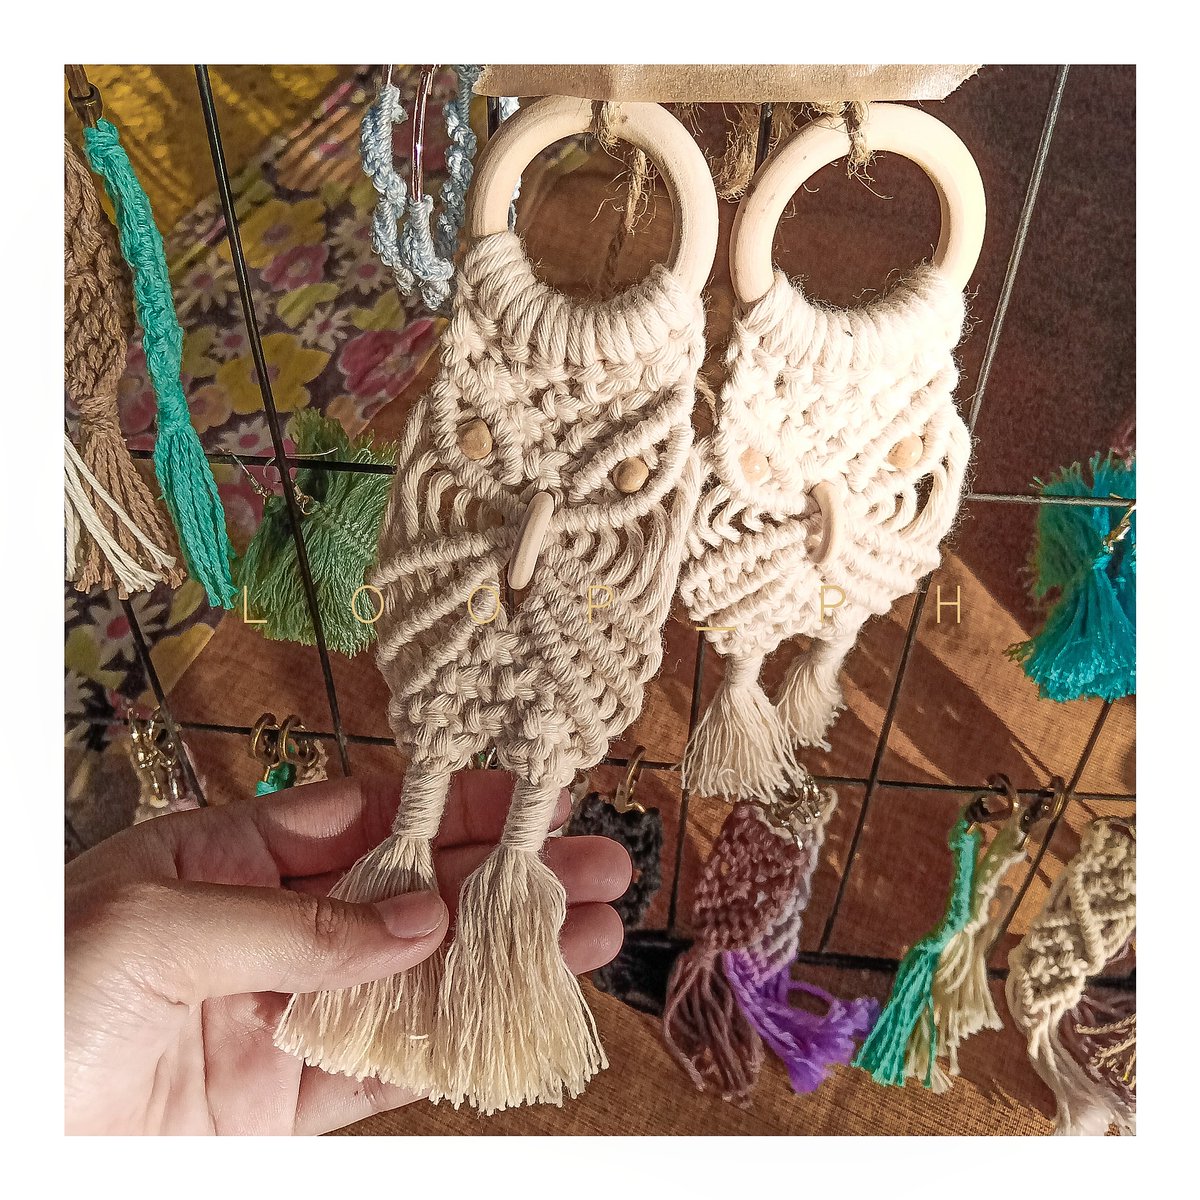 Owl ornament 🦉 Give your blank wall a statement 🌿

#owl #ornaments #macrame #macramewallhanging #fiberart #fiberartist #macramemovement #macramelove